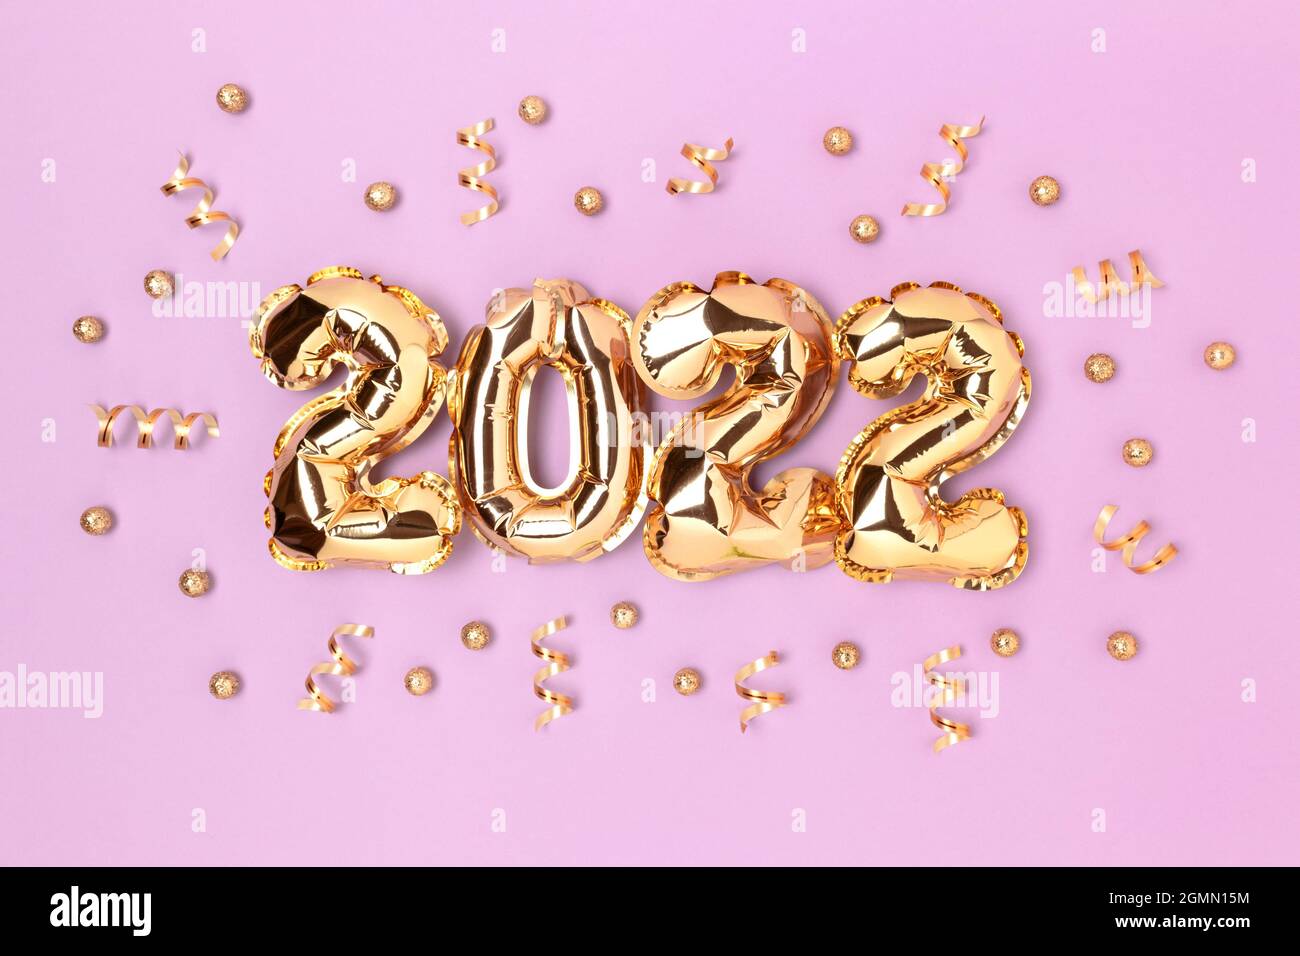 2022 gold inflatable balloons and confetti on a purple background. Holidays concept. Stock Photo